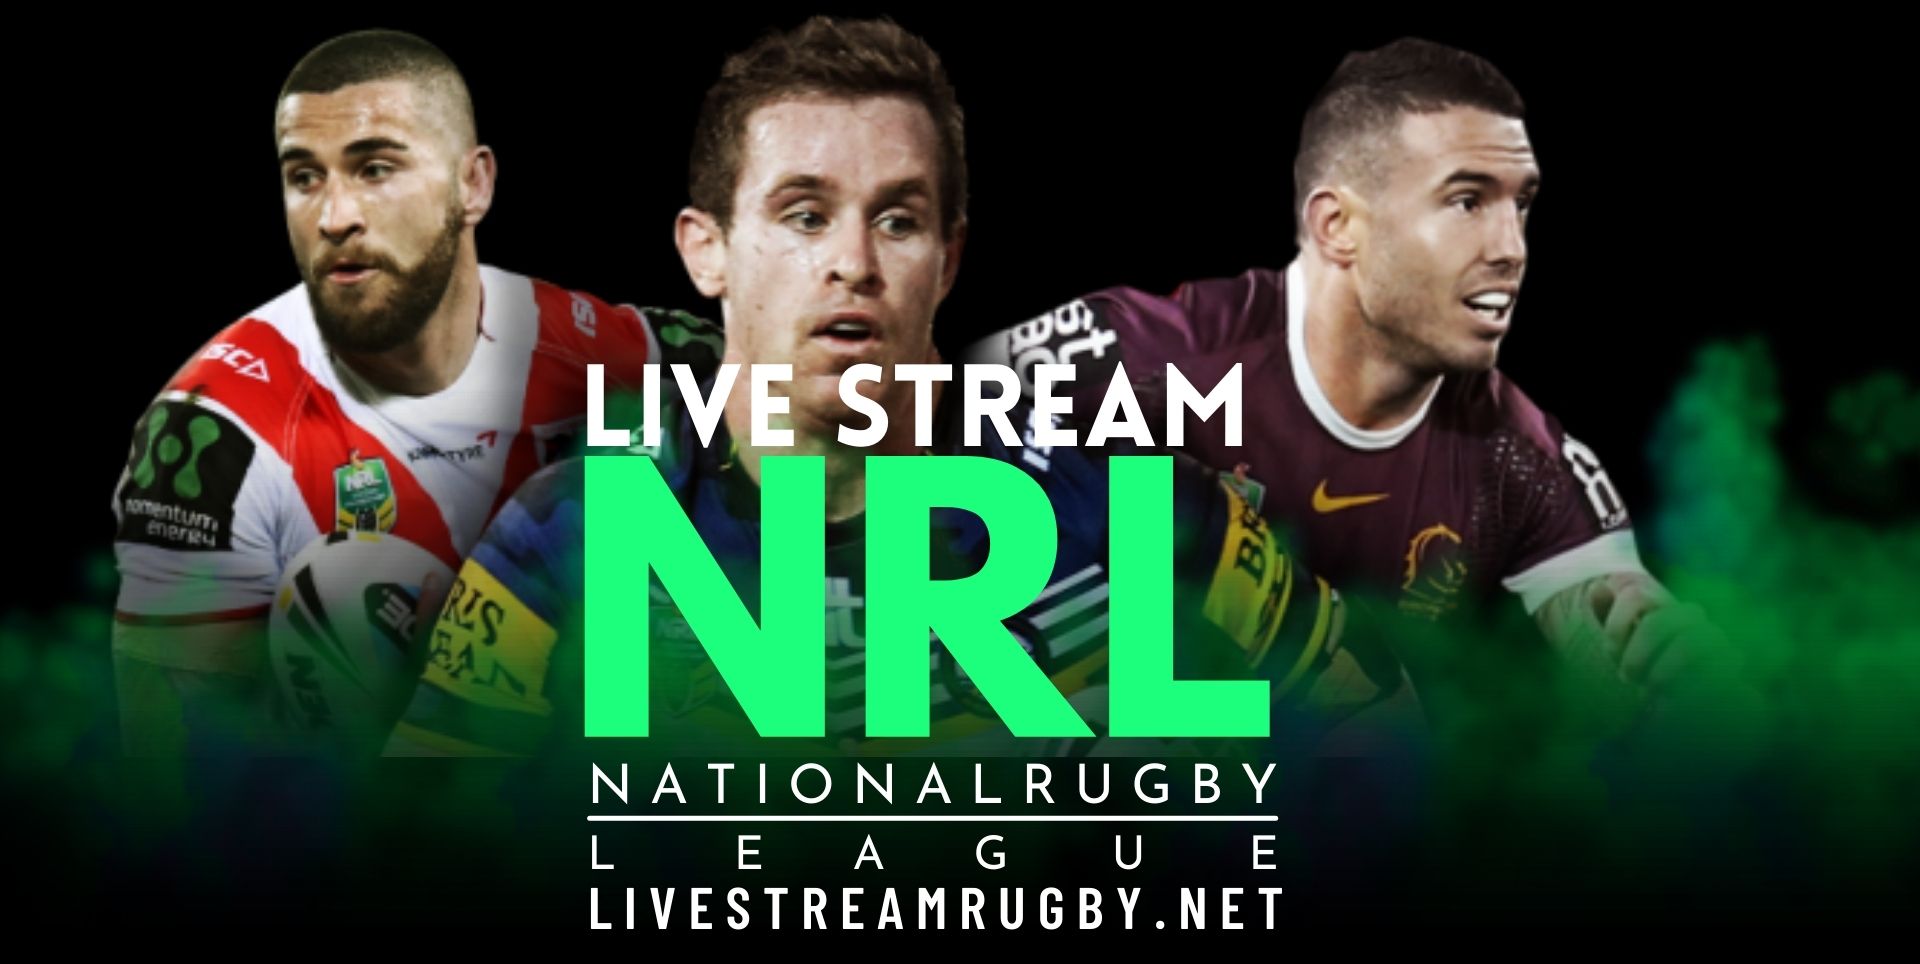 nrl-rugby-live-stream-schedule-and-fixtures